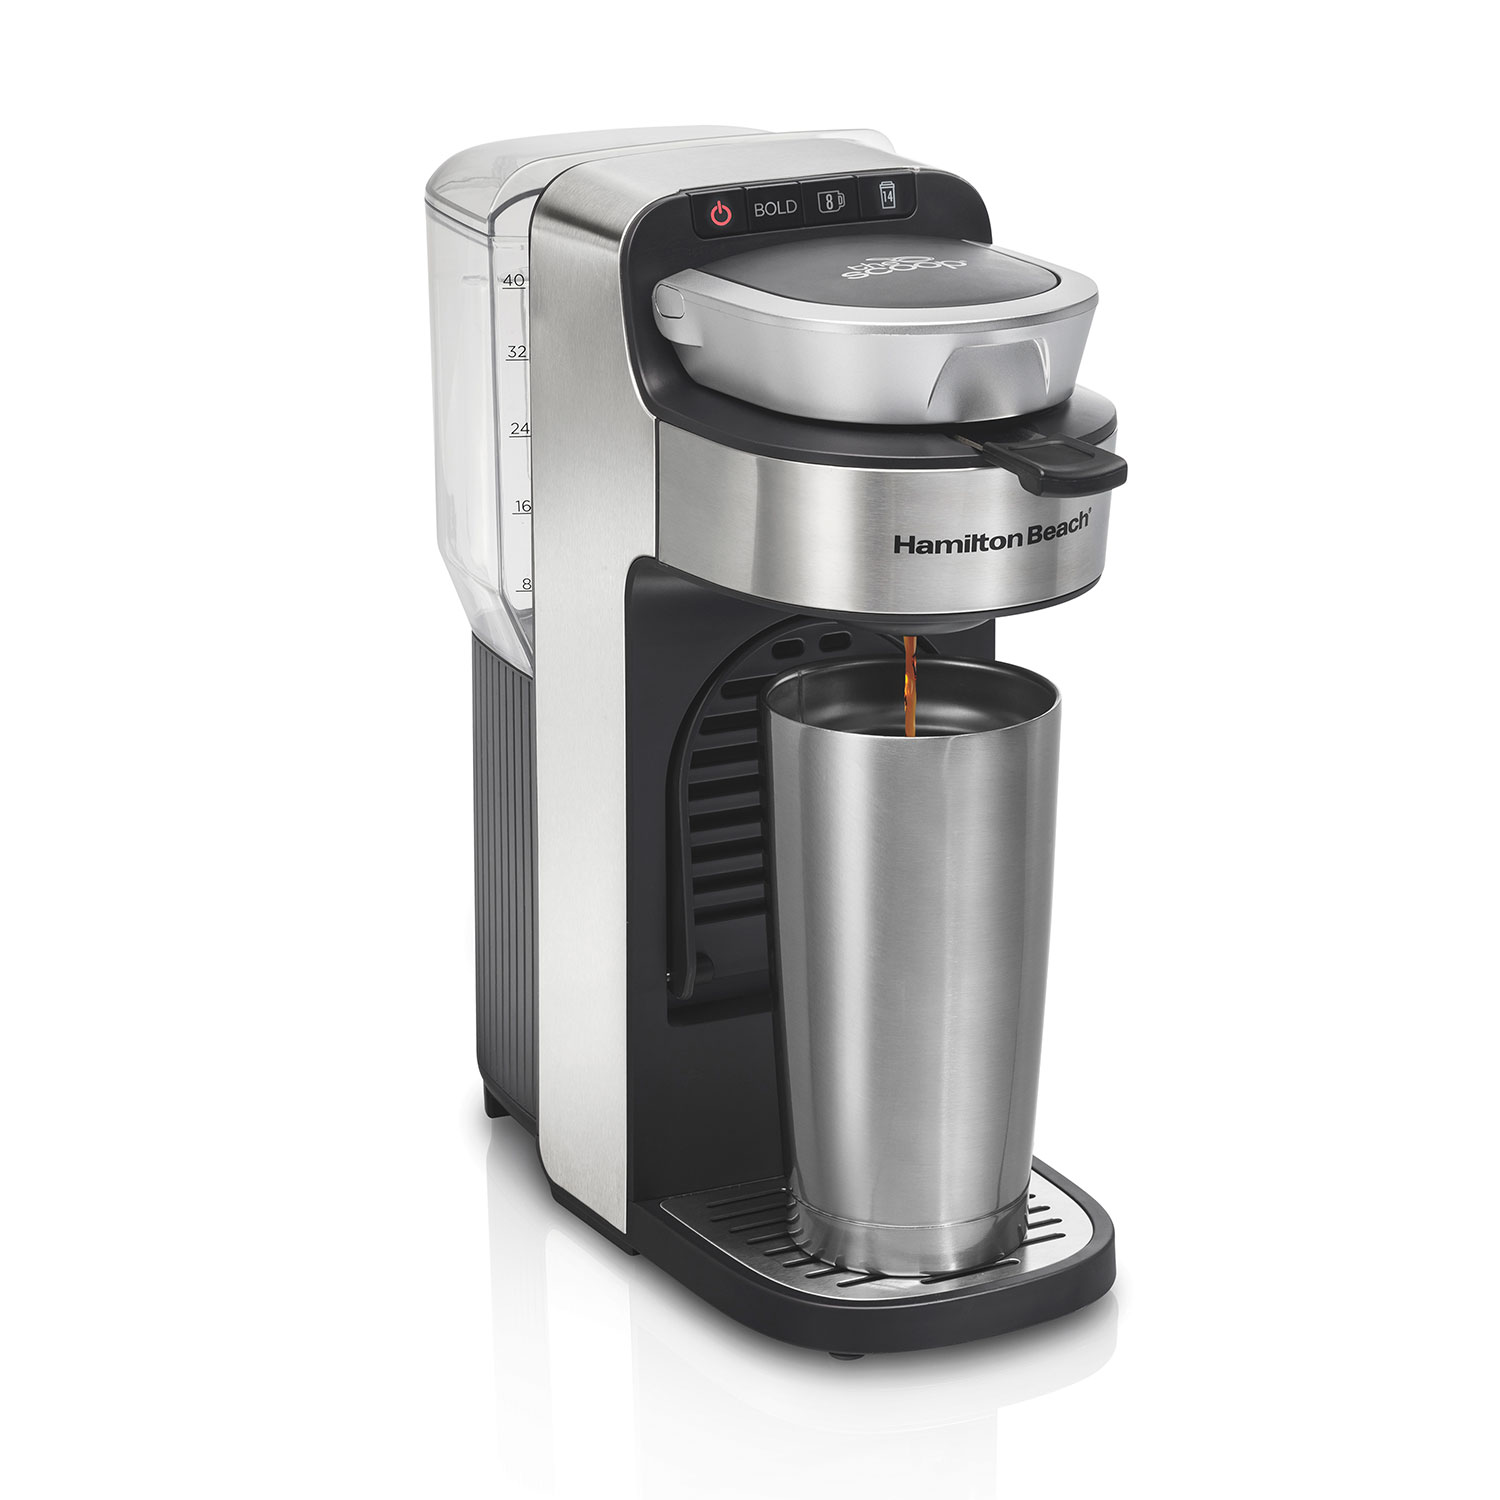 Hamilton Beach The Scoop® Single-Serve Coffee Maker with Removable